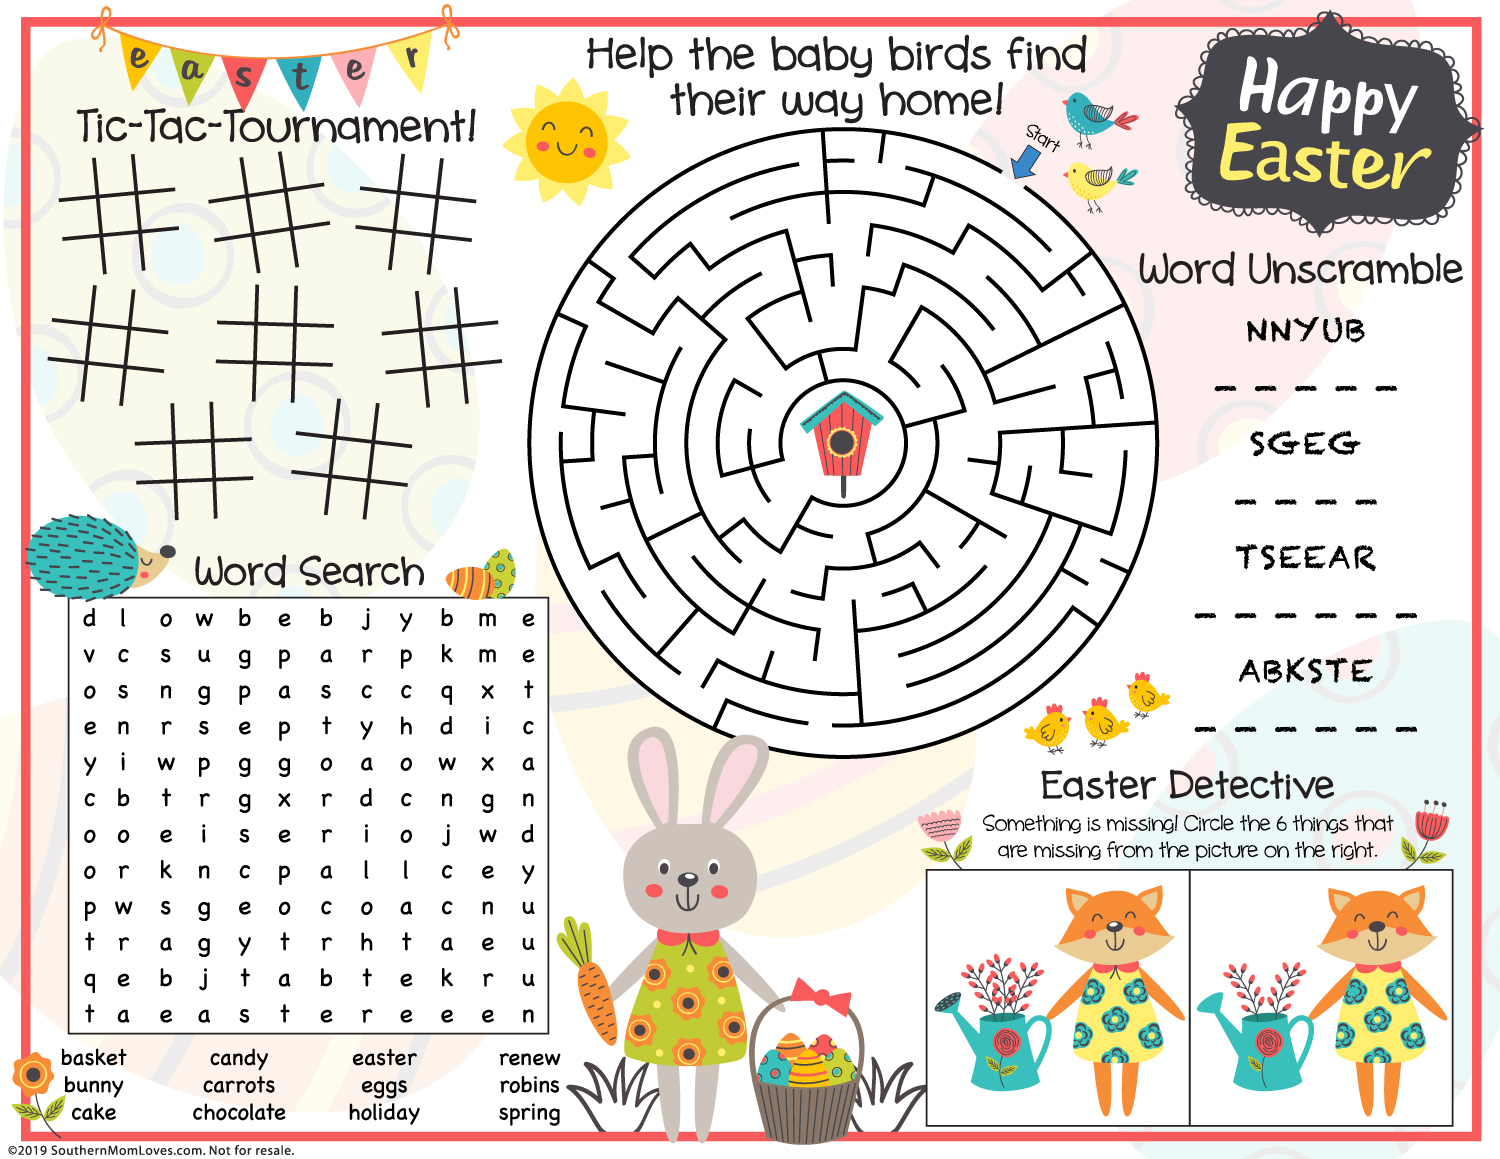 Southern Mom Loves Printable Easter Game Placemats For Your Kids Table 